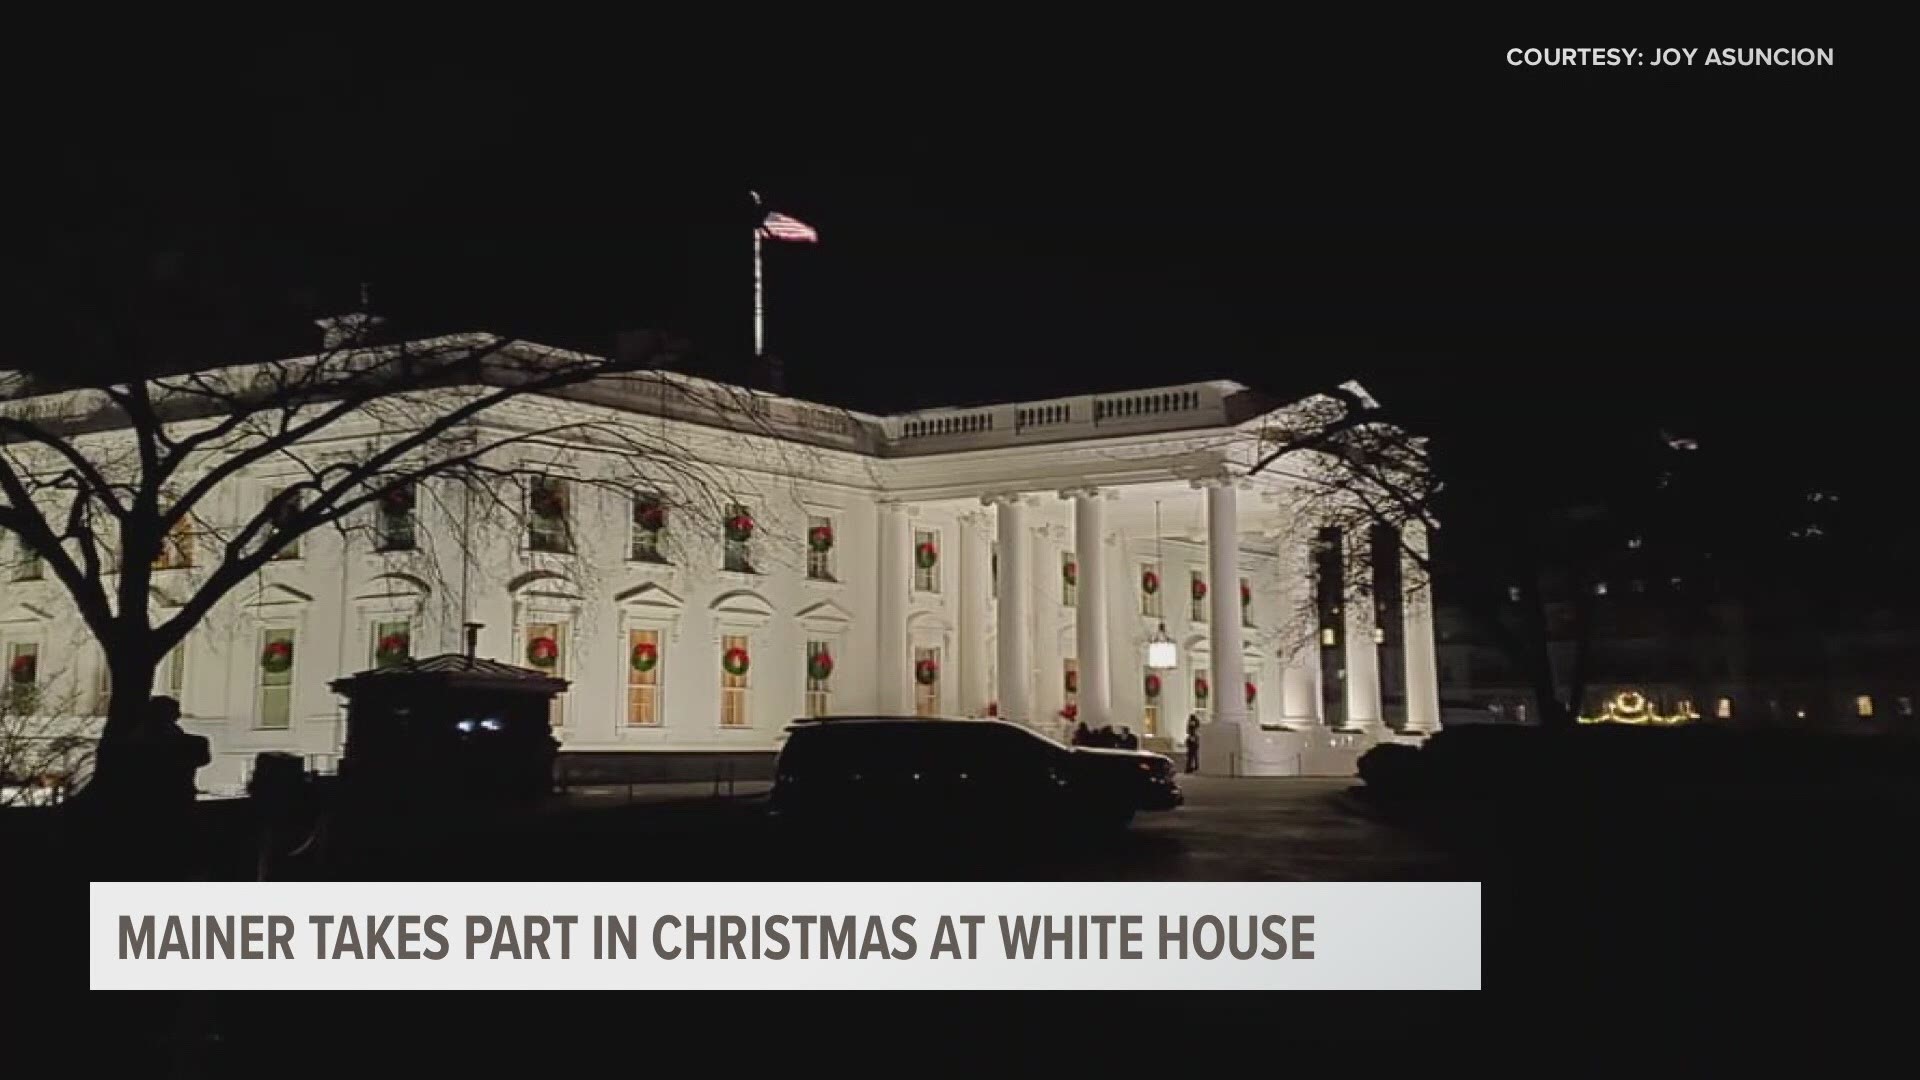 A woman from Maine got the honor to take part in Christmas at the White House this year.